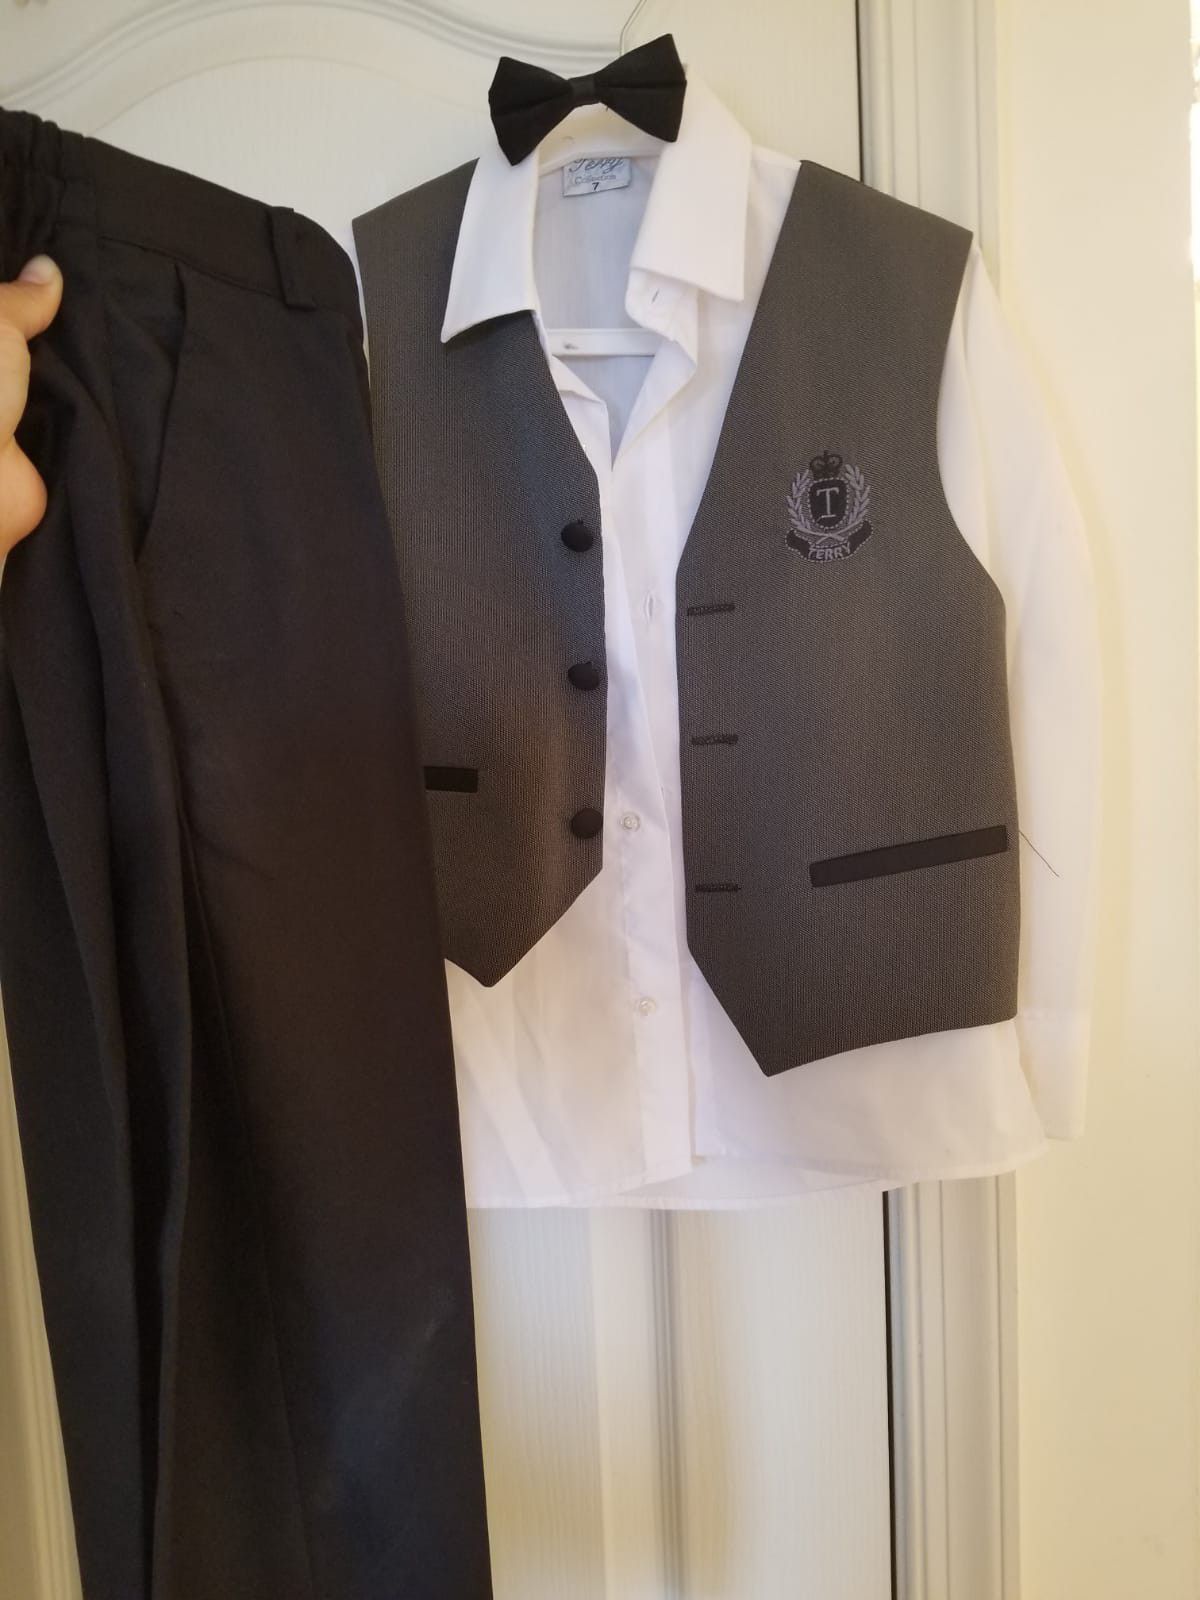 7 year old boy Suit.